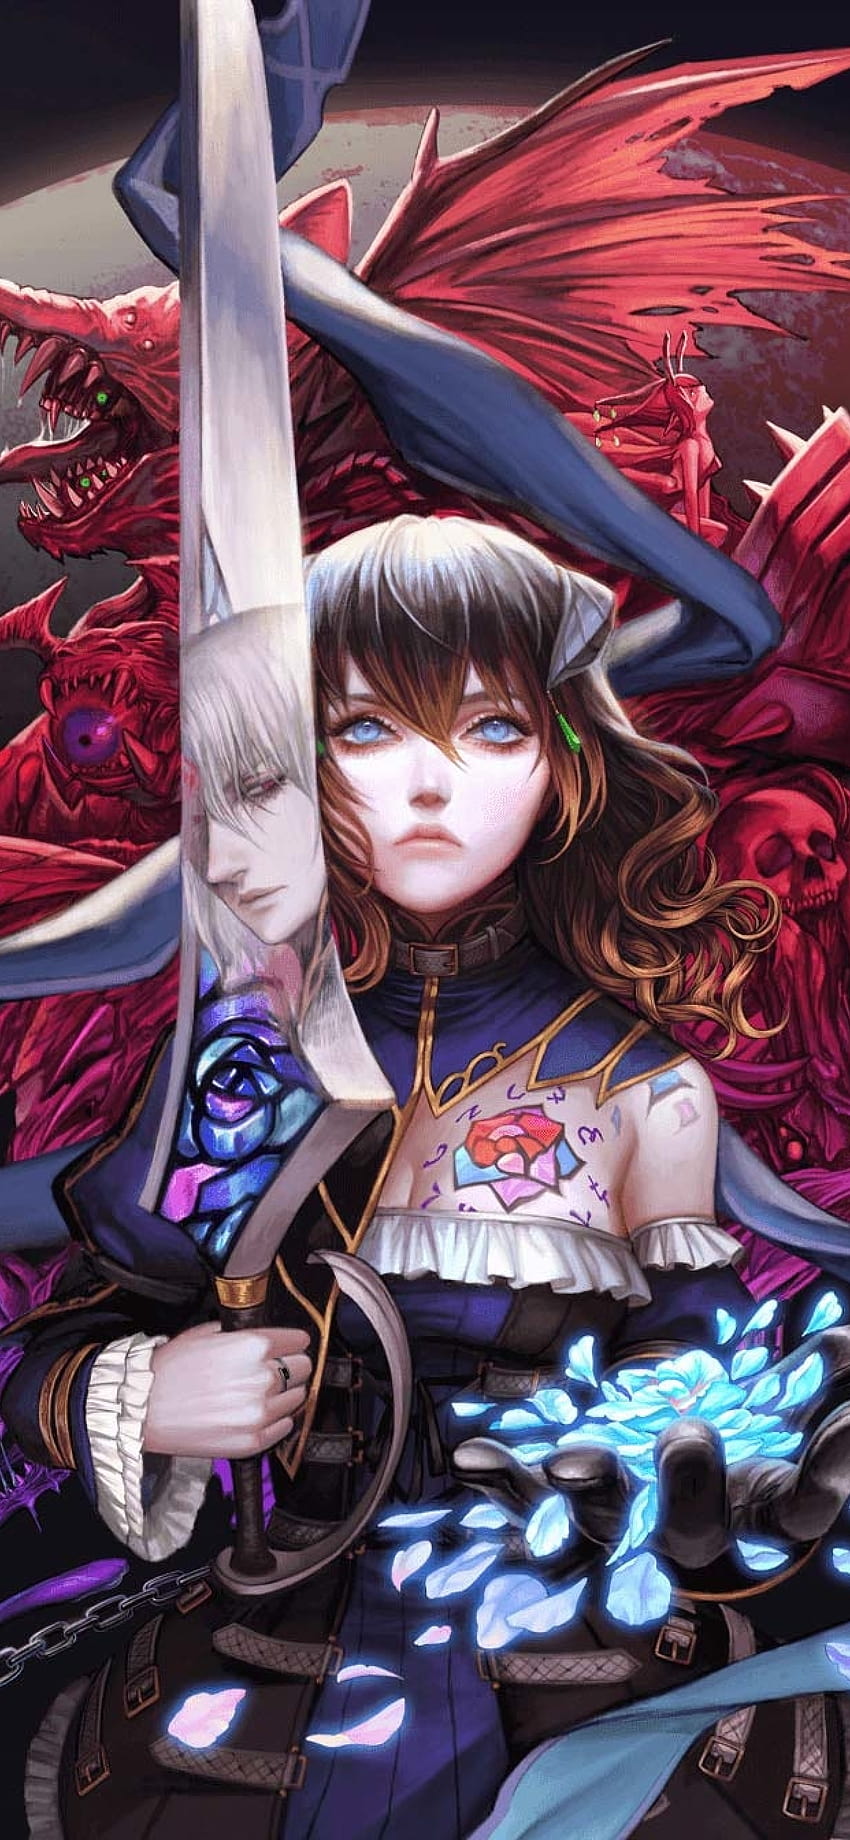 1242x2688 Bloodstained Ritual of the Night Iphone XS MAX, bloodstained ritual mobile HD phone wallpaper